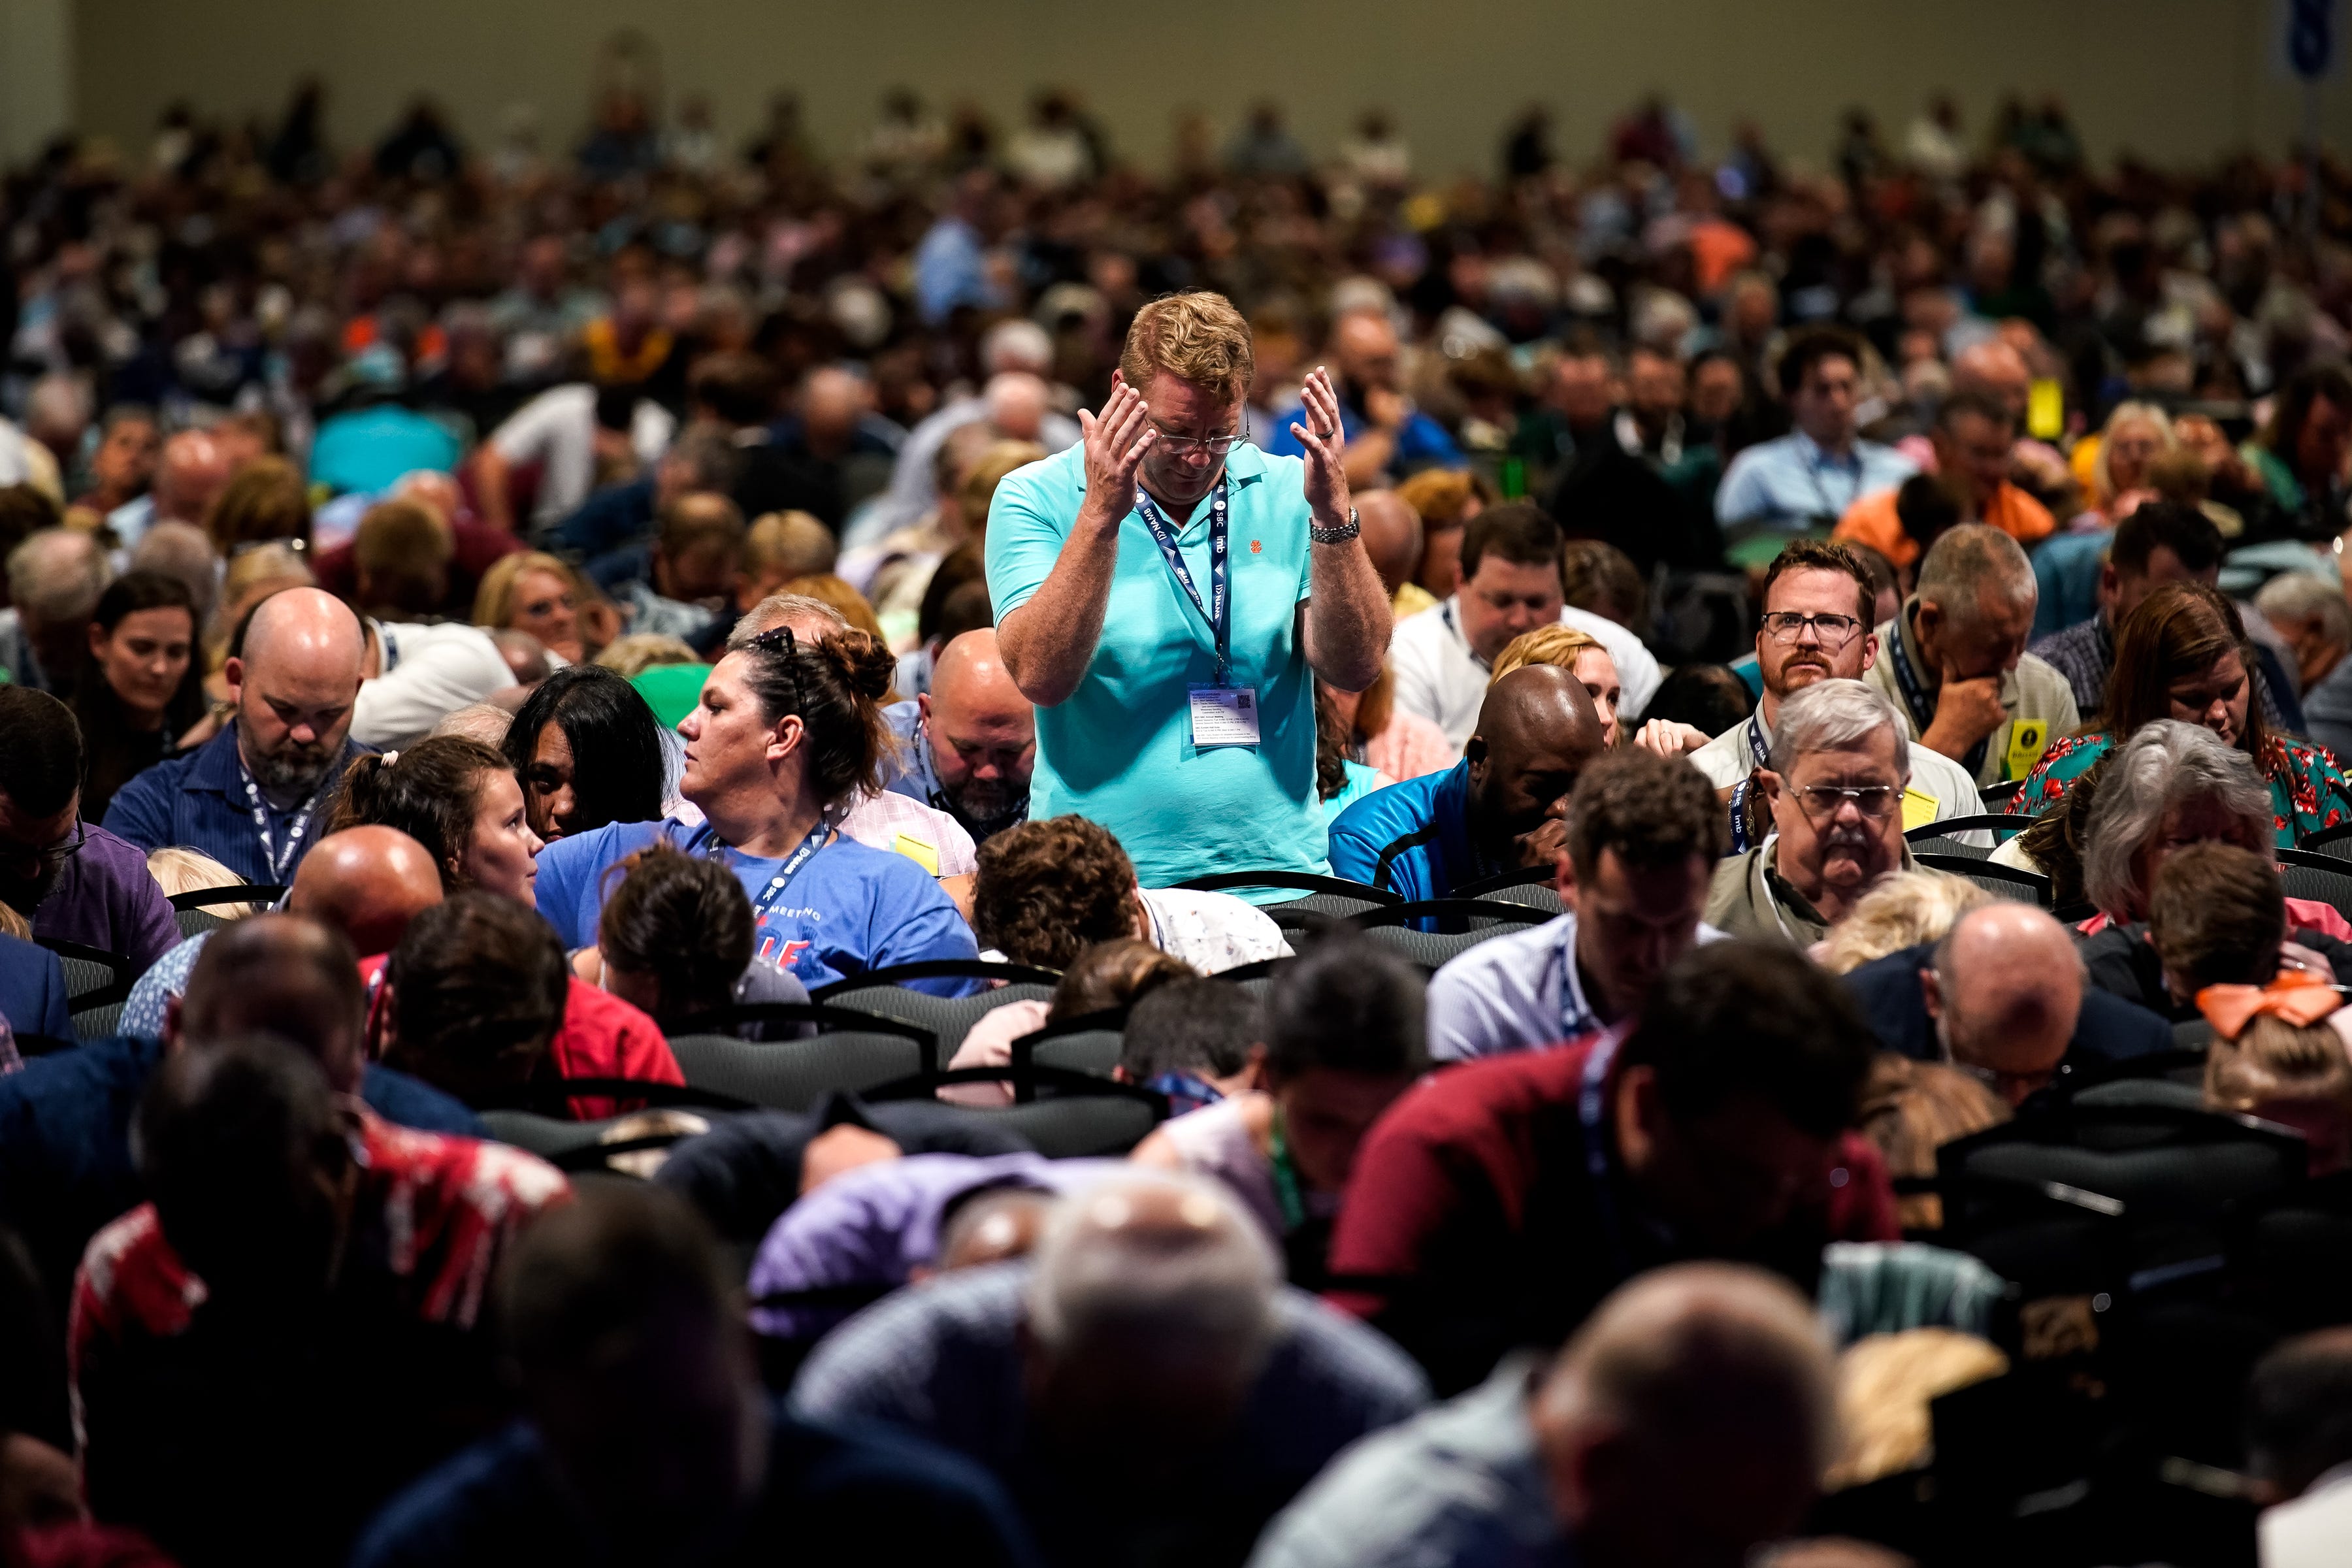 Southern Baptist Convention 2021 Nashville annual meeting concludes